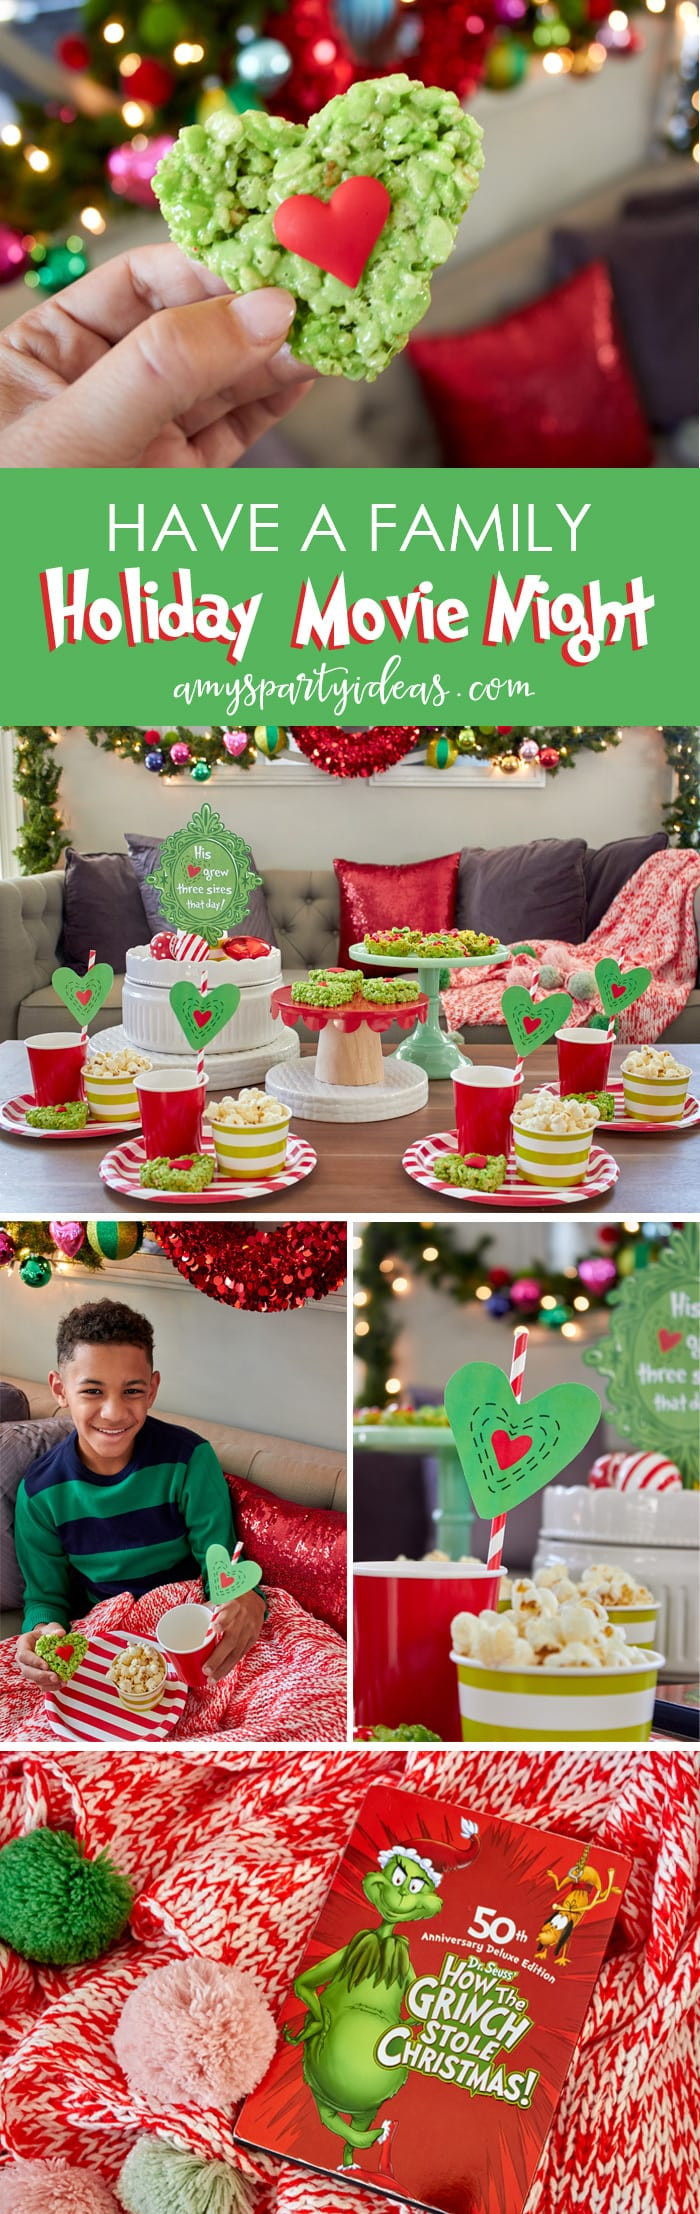 Christmas Party Decorations Ideas
 Holiday Family Movie Night